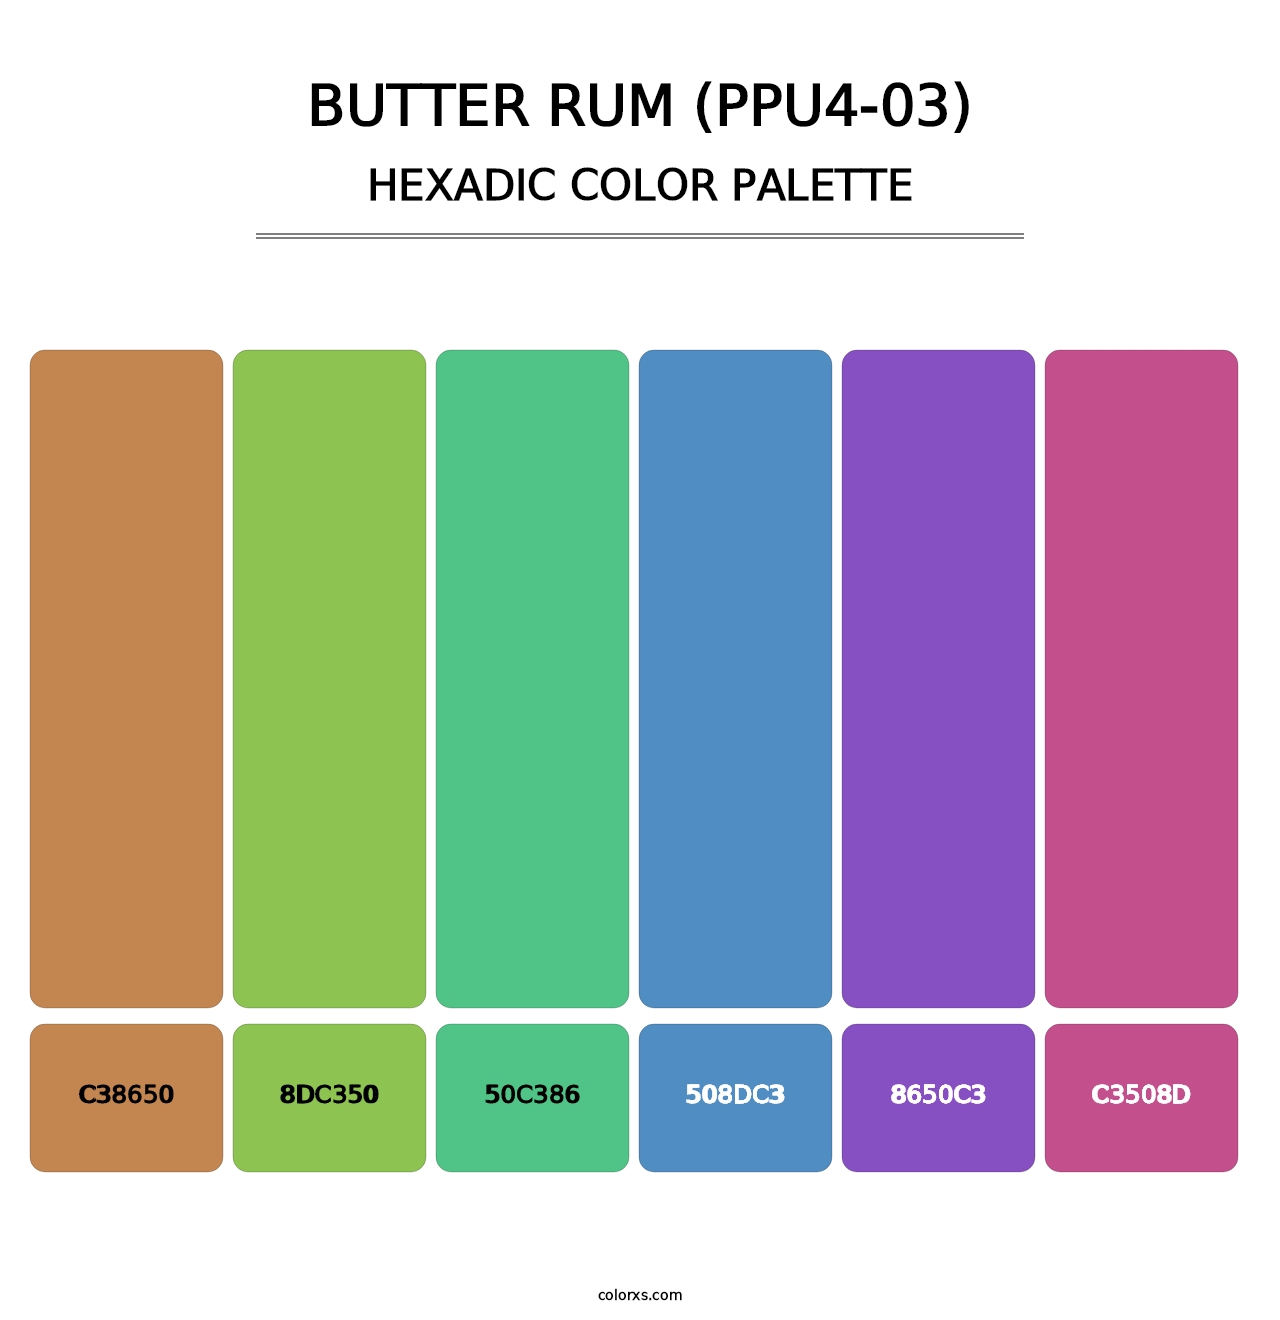 Butter Rum (PPU4-03) - Hexadic Color Palette